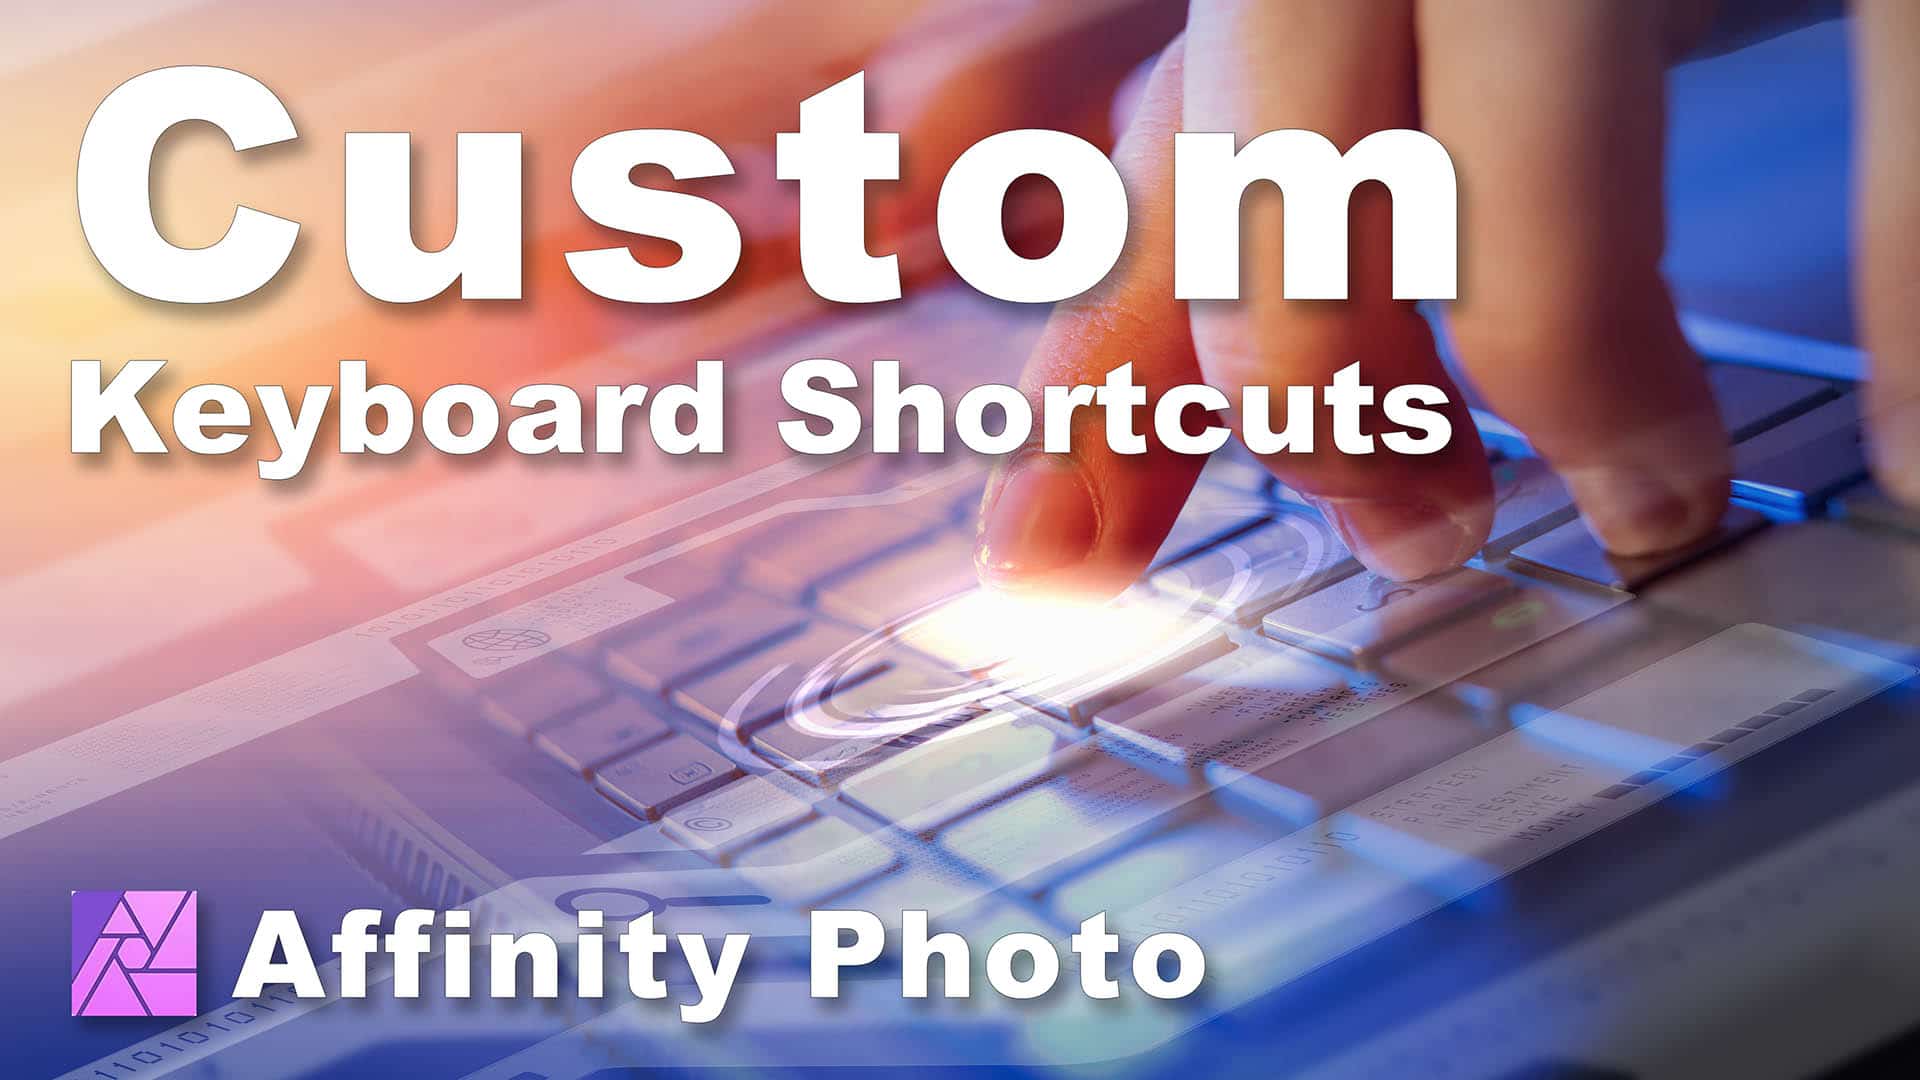 Creating Custom Keyboard Shortcuts in Affinity video thumbnail and title image